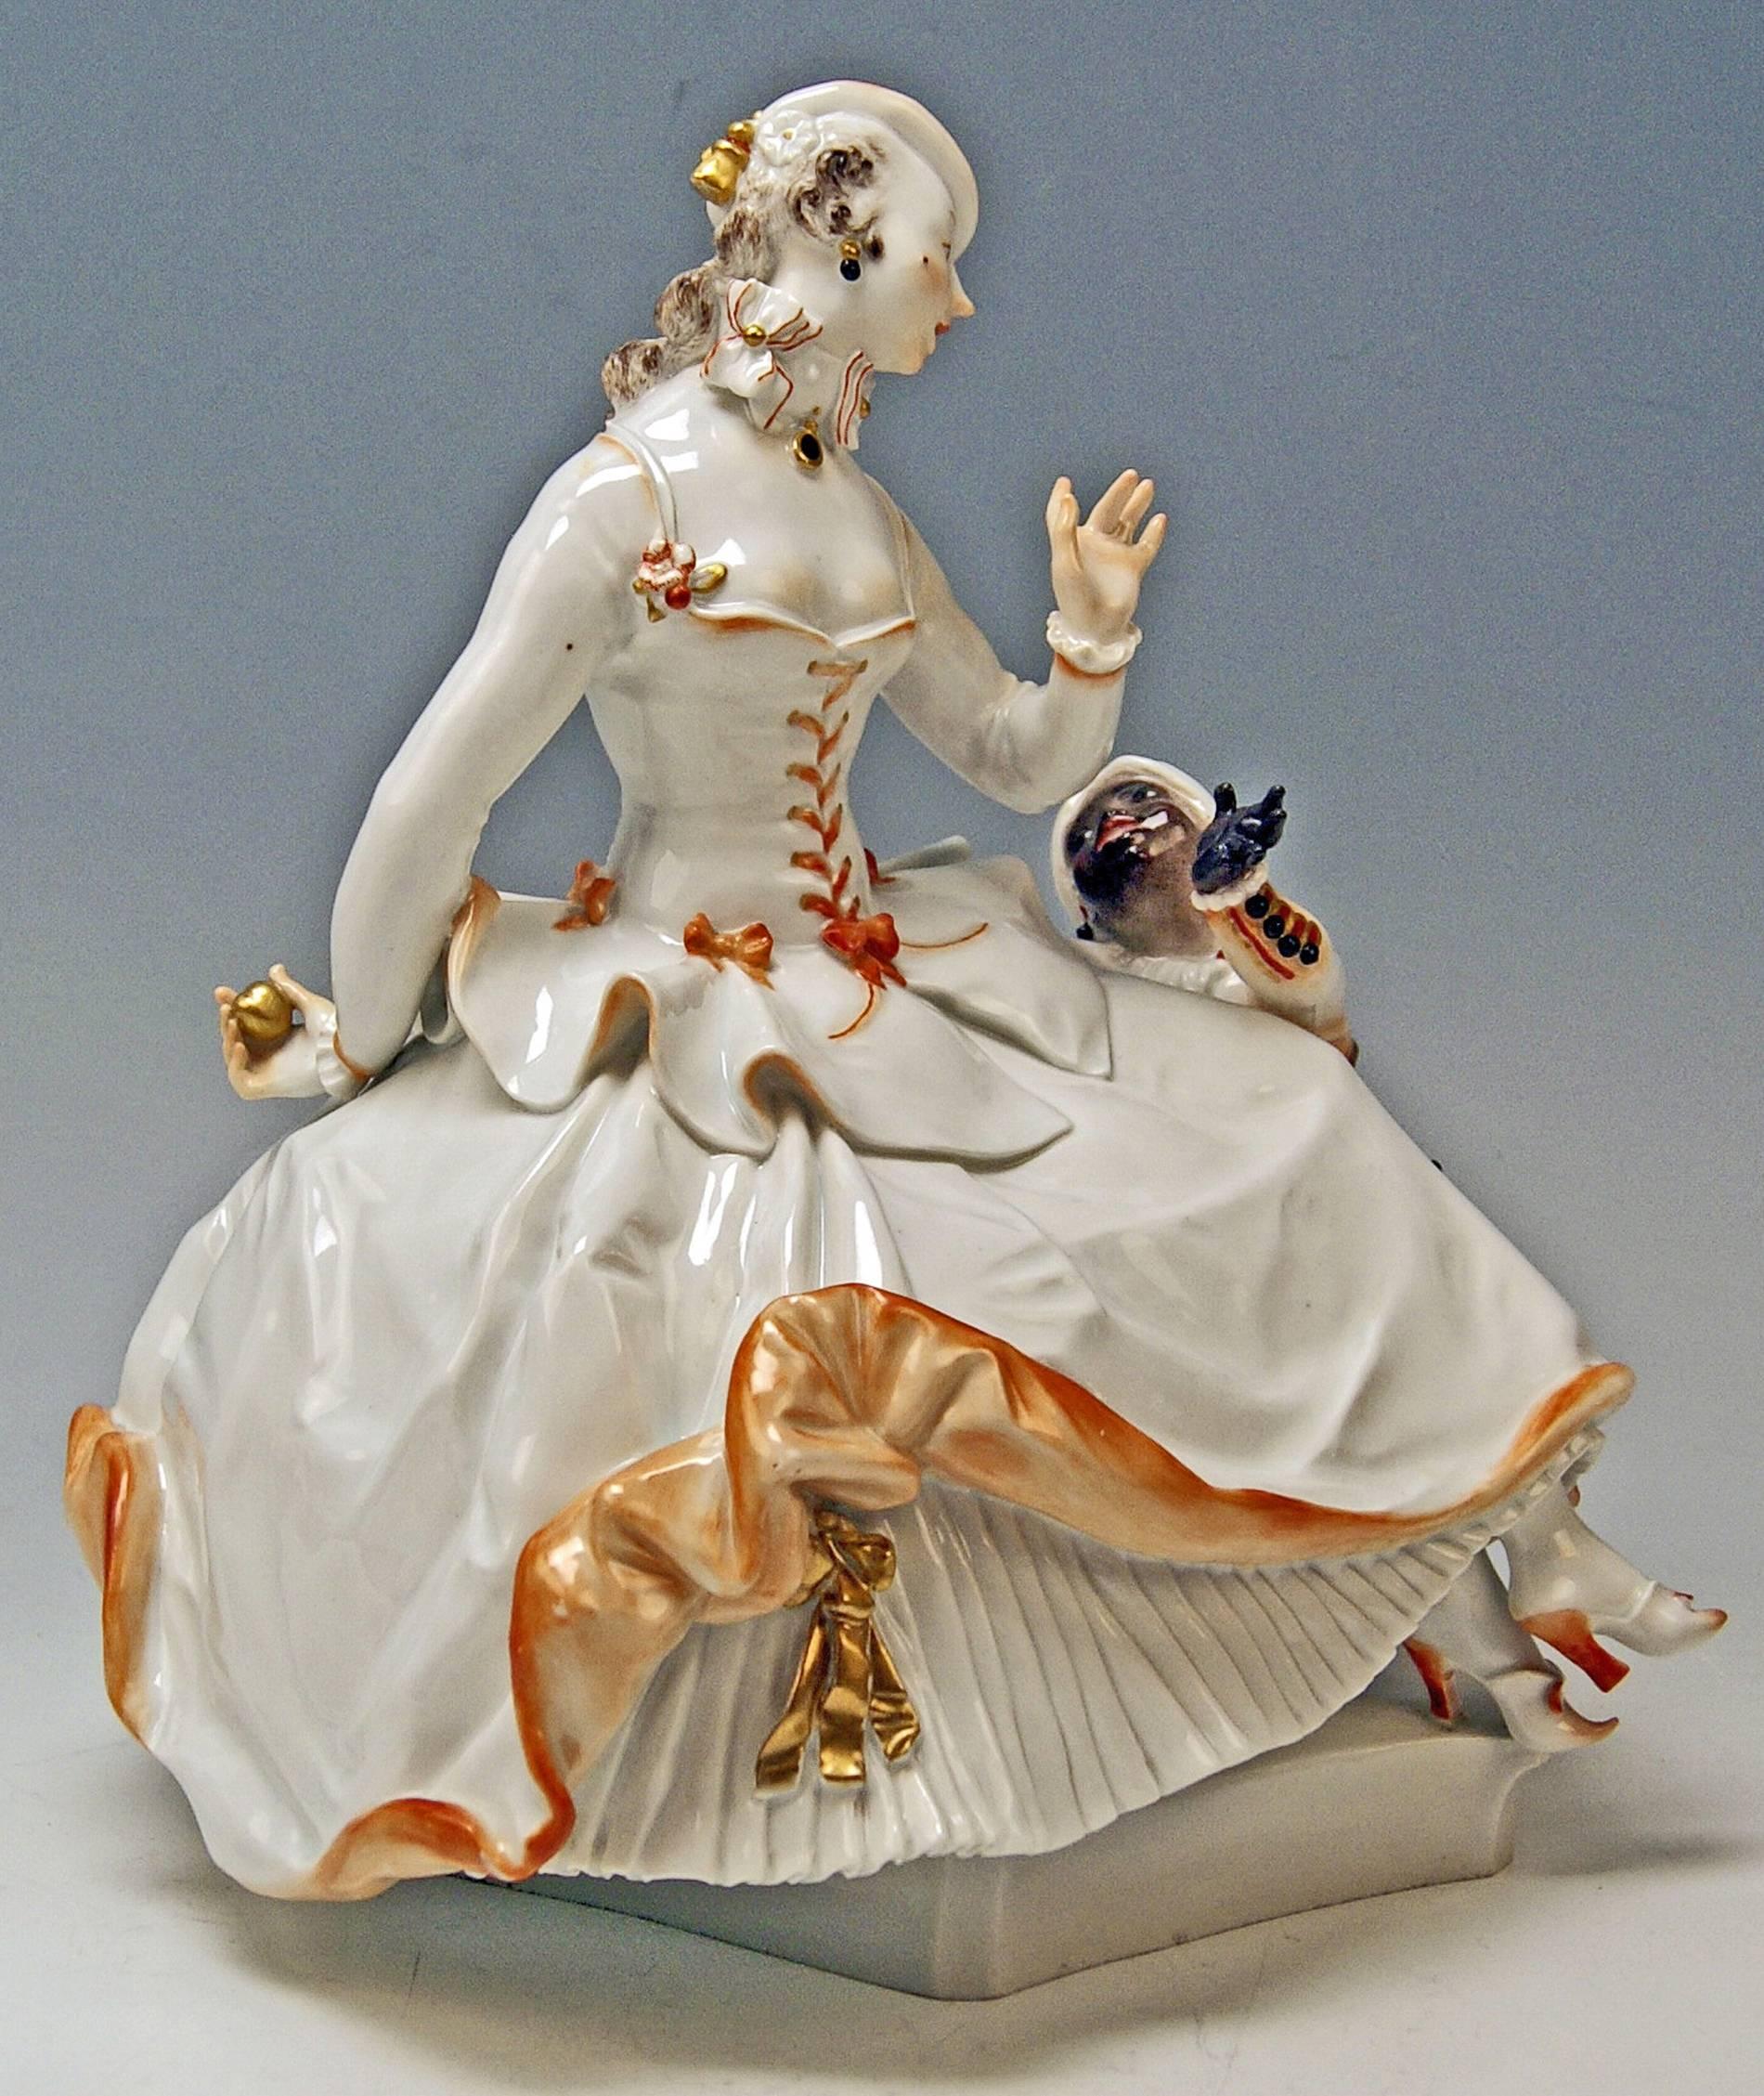 Meissen remarkable figurine group
By Paul Scheurich (1883-1945).
Lady and black boy.
Designed 1919-1920.

Designer: Paul Scheurich (1883-1945).
Paul Scheurich was painter, sculptor, graphic artist, drawer and stage designer. He studied at